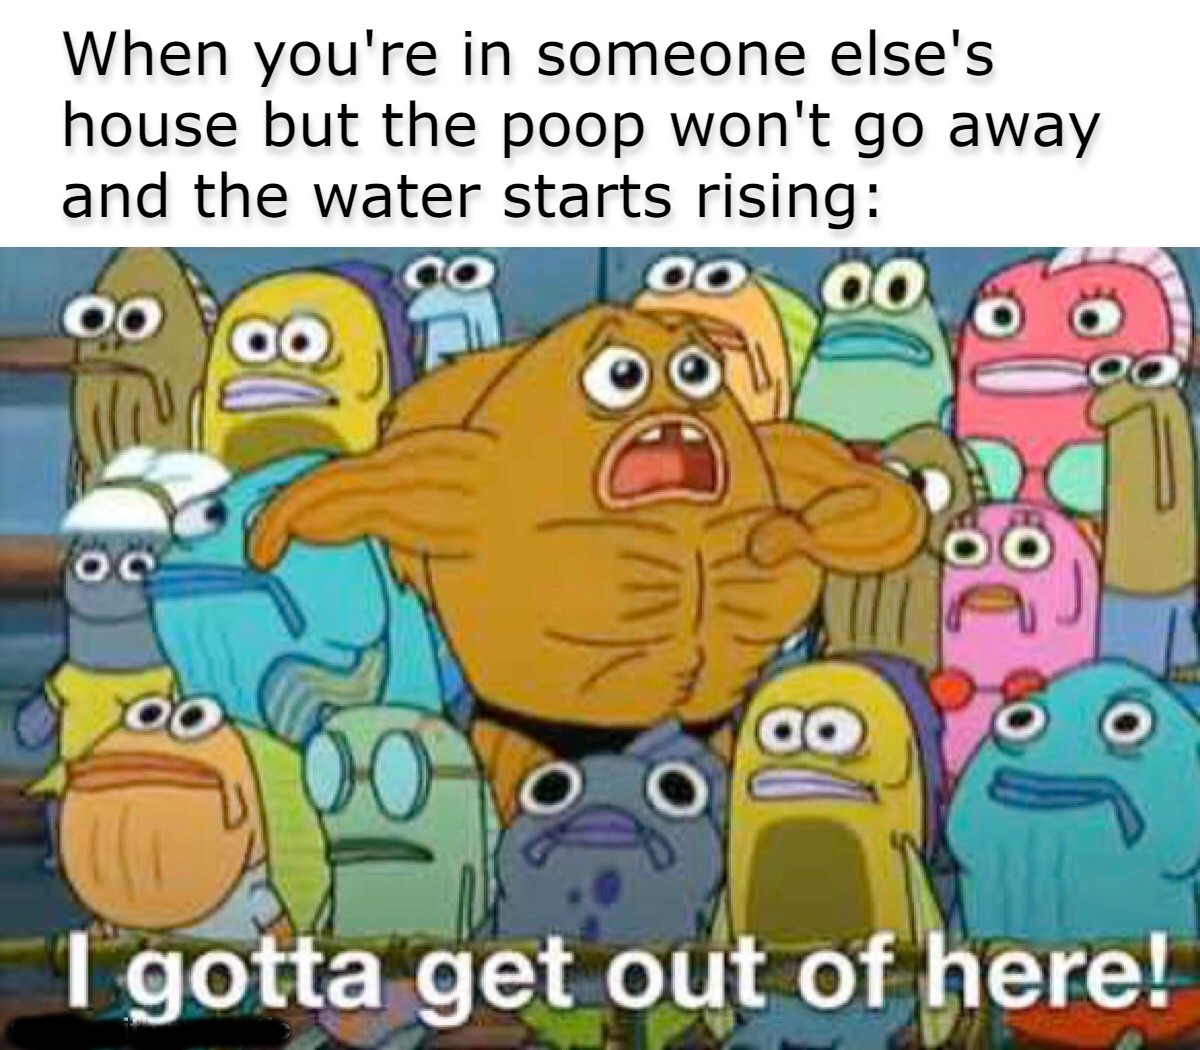 funny memes - dank memes - gotta get outta here meme - When you're in someone else's house but the poop won't go away and the water starts rising 00 I gotta get out of here!